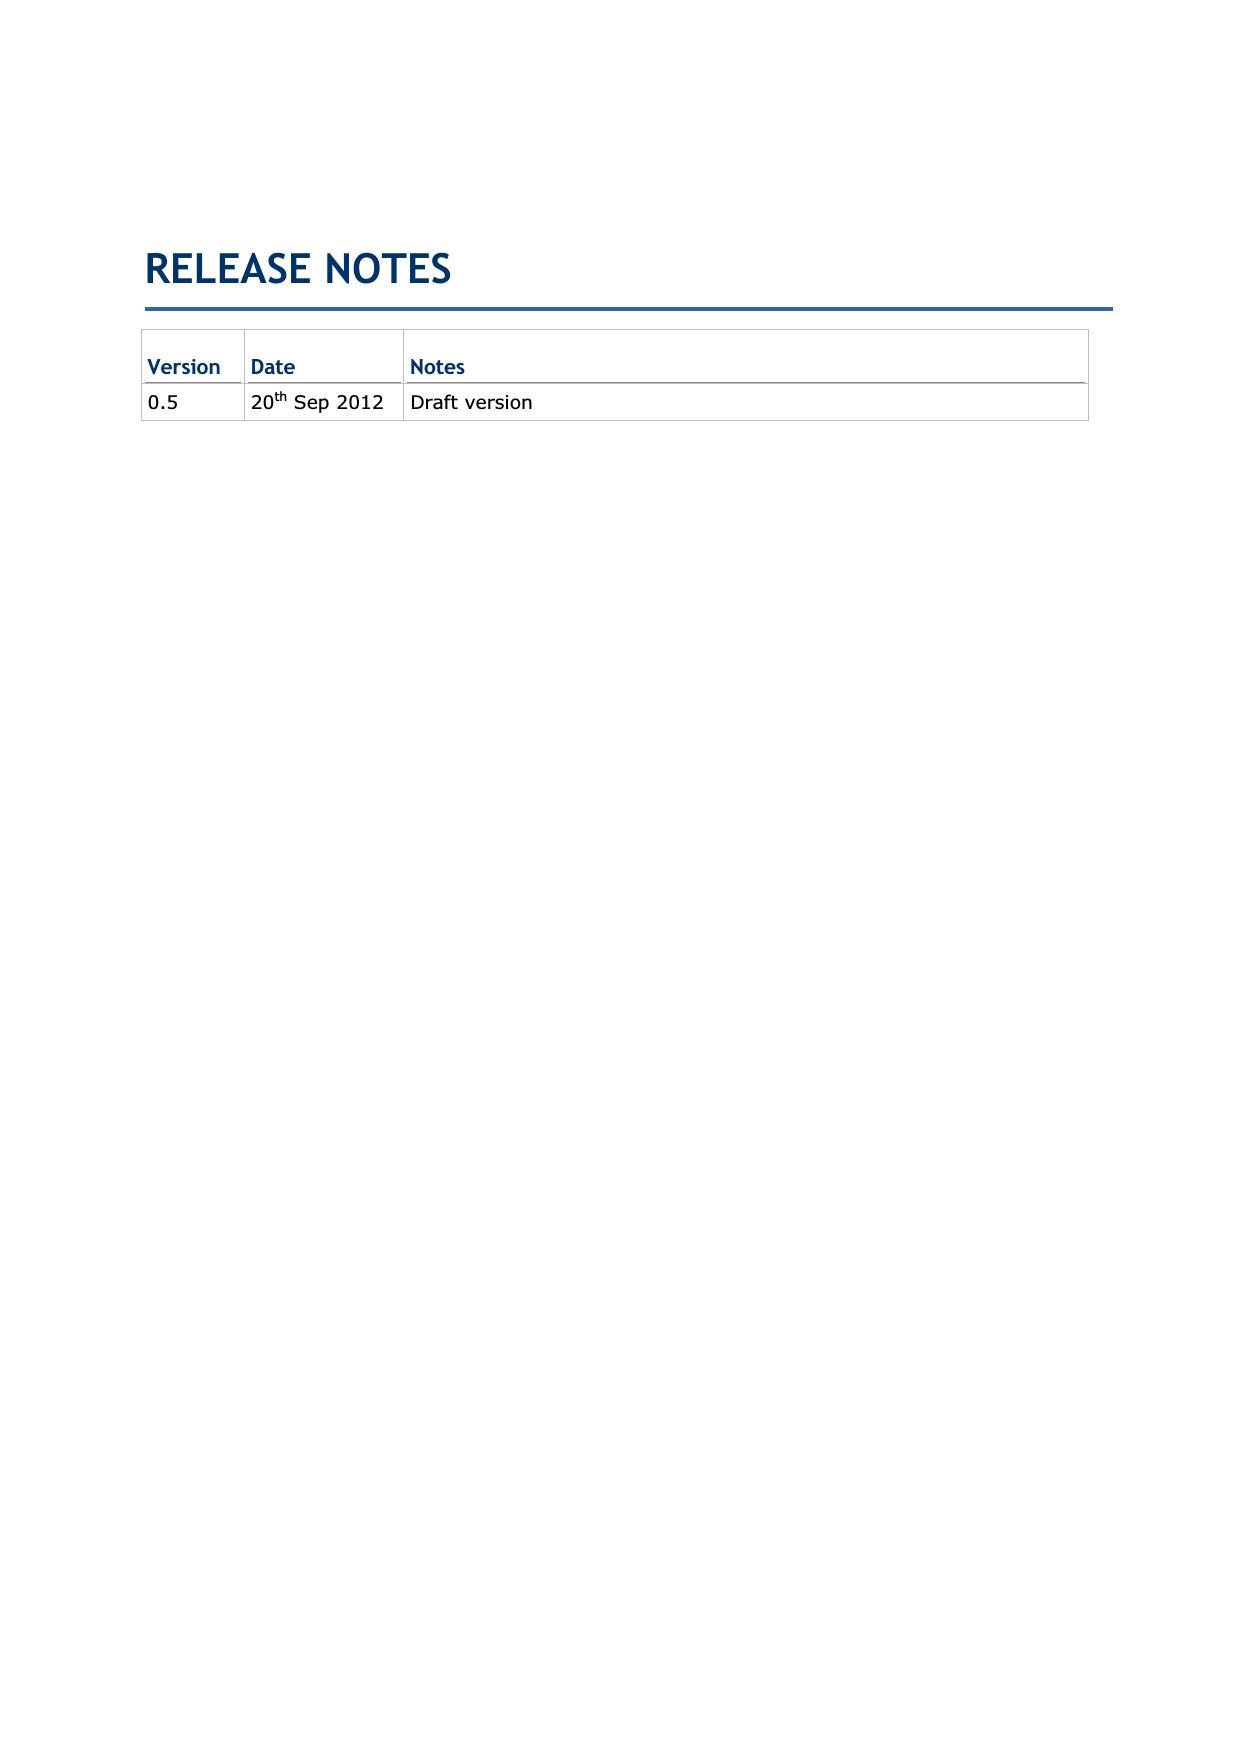 Version Date Notes 0.5 20th Sep 2012  Draft version RELEASE NOTES 